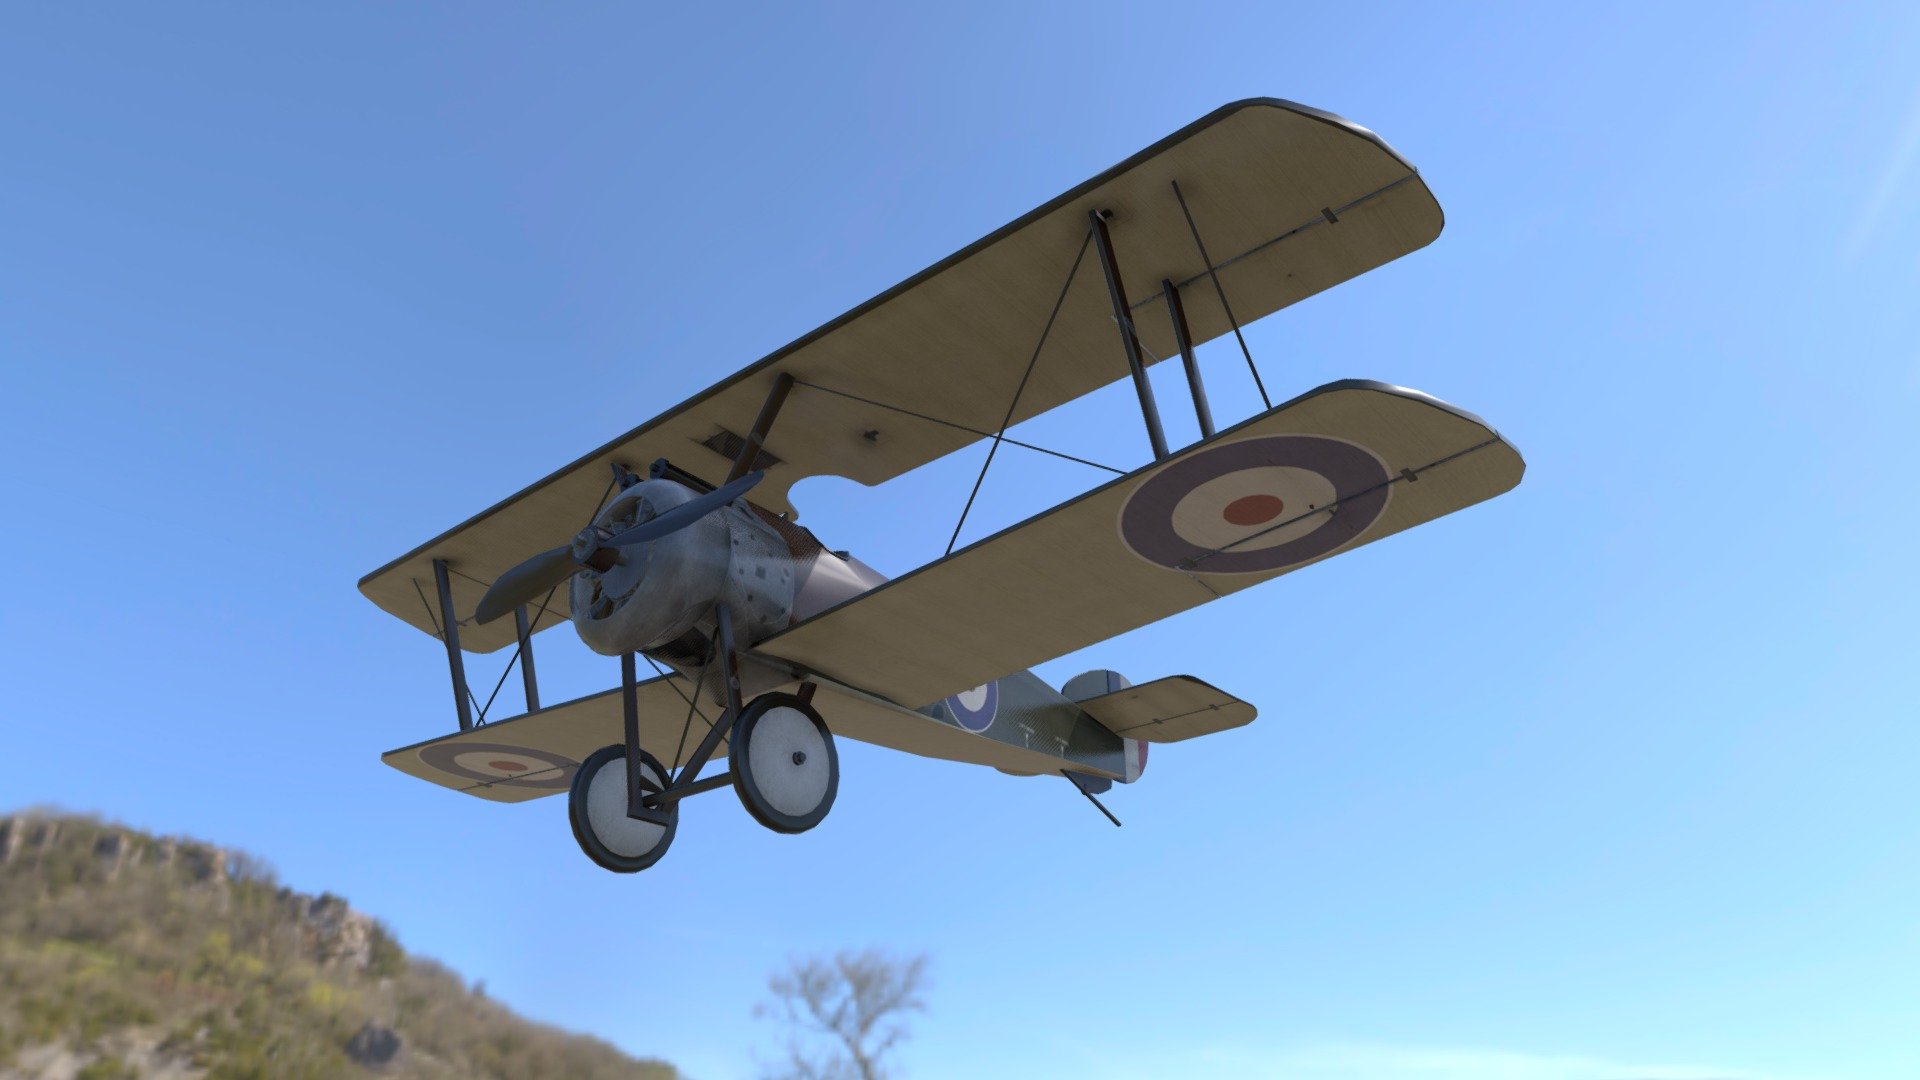 The Sopwith Camel was a British First World War single-seat biplane fighter aircraft that was introduced on the Western Front in 1917. It was developed by the Sopwith Aviation Company as a successor to the Sopwith Pup and became one of the best known fighter aircraft of the Great War 3d model